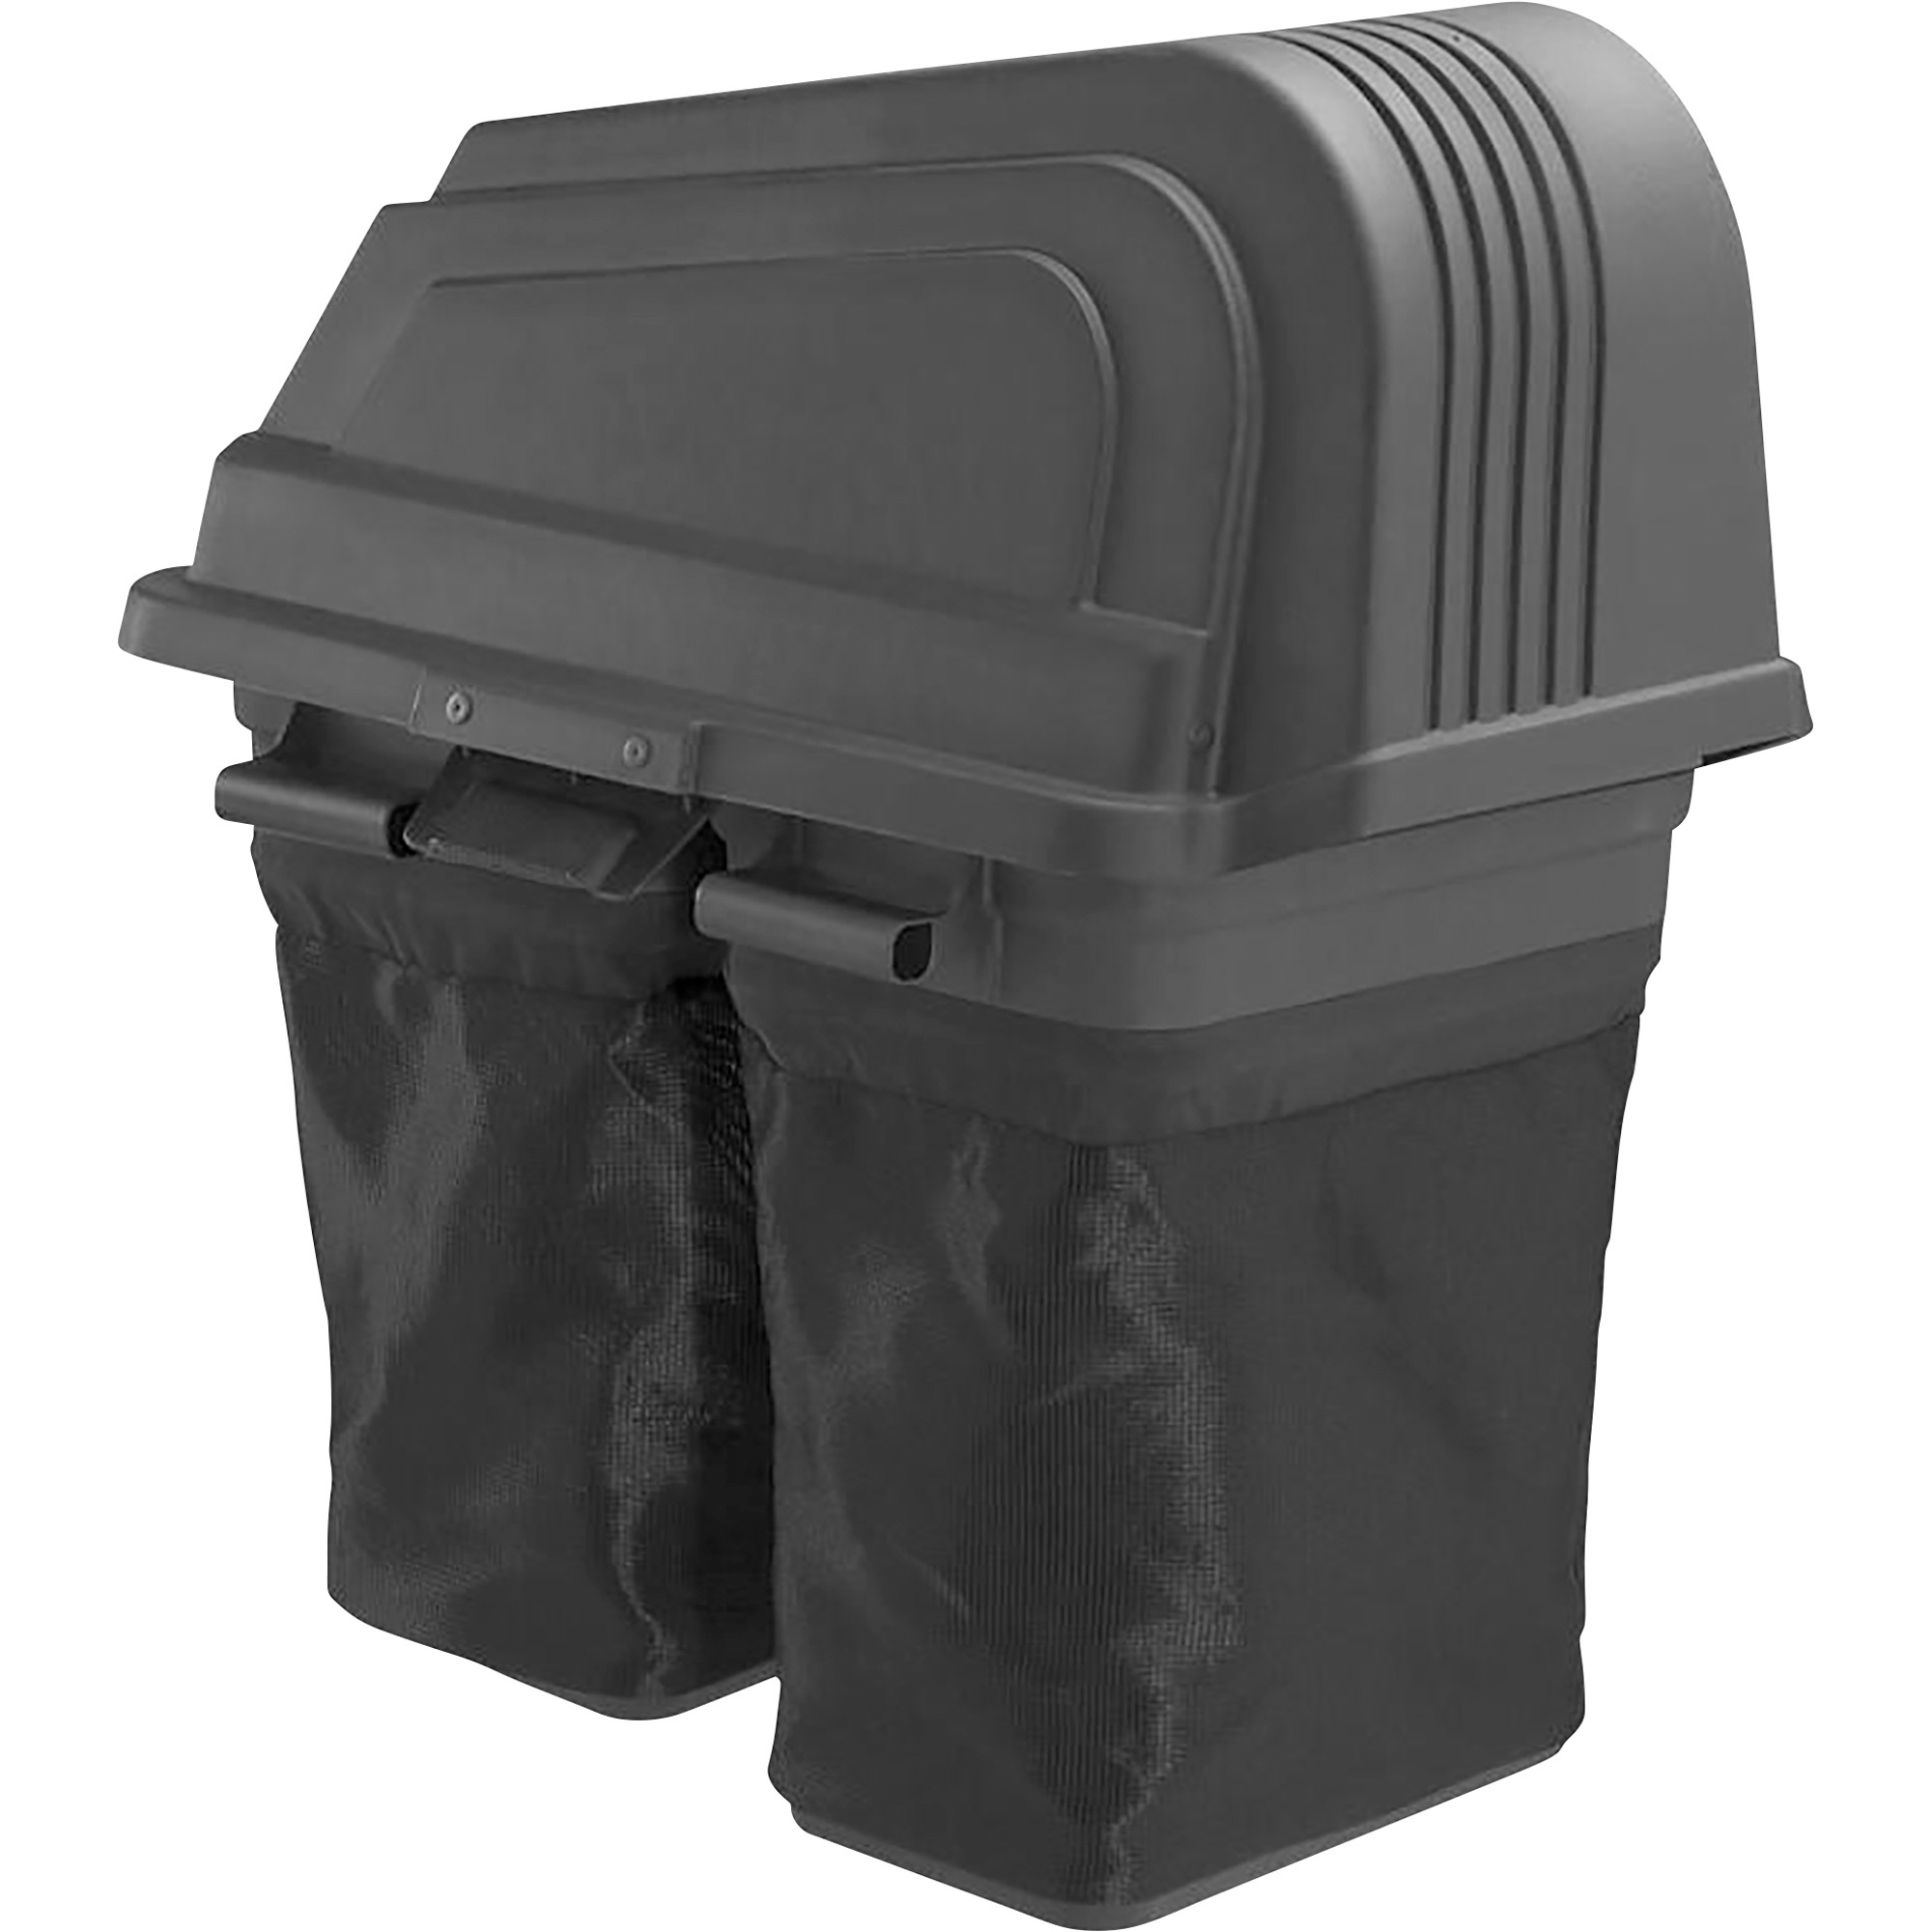 Husqvarna ClearCut Double Bagger Riding Lawn Mower Collection System, 6 Bushel, Fits 42Inch Riding Mowers, Model 587412701